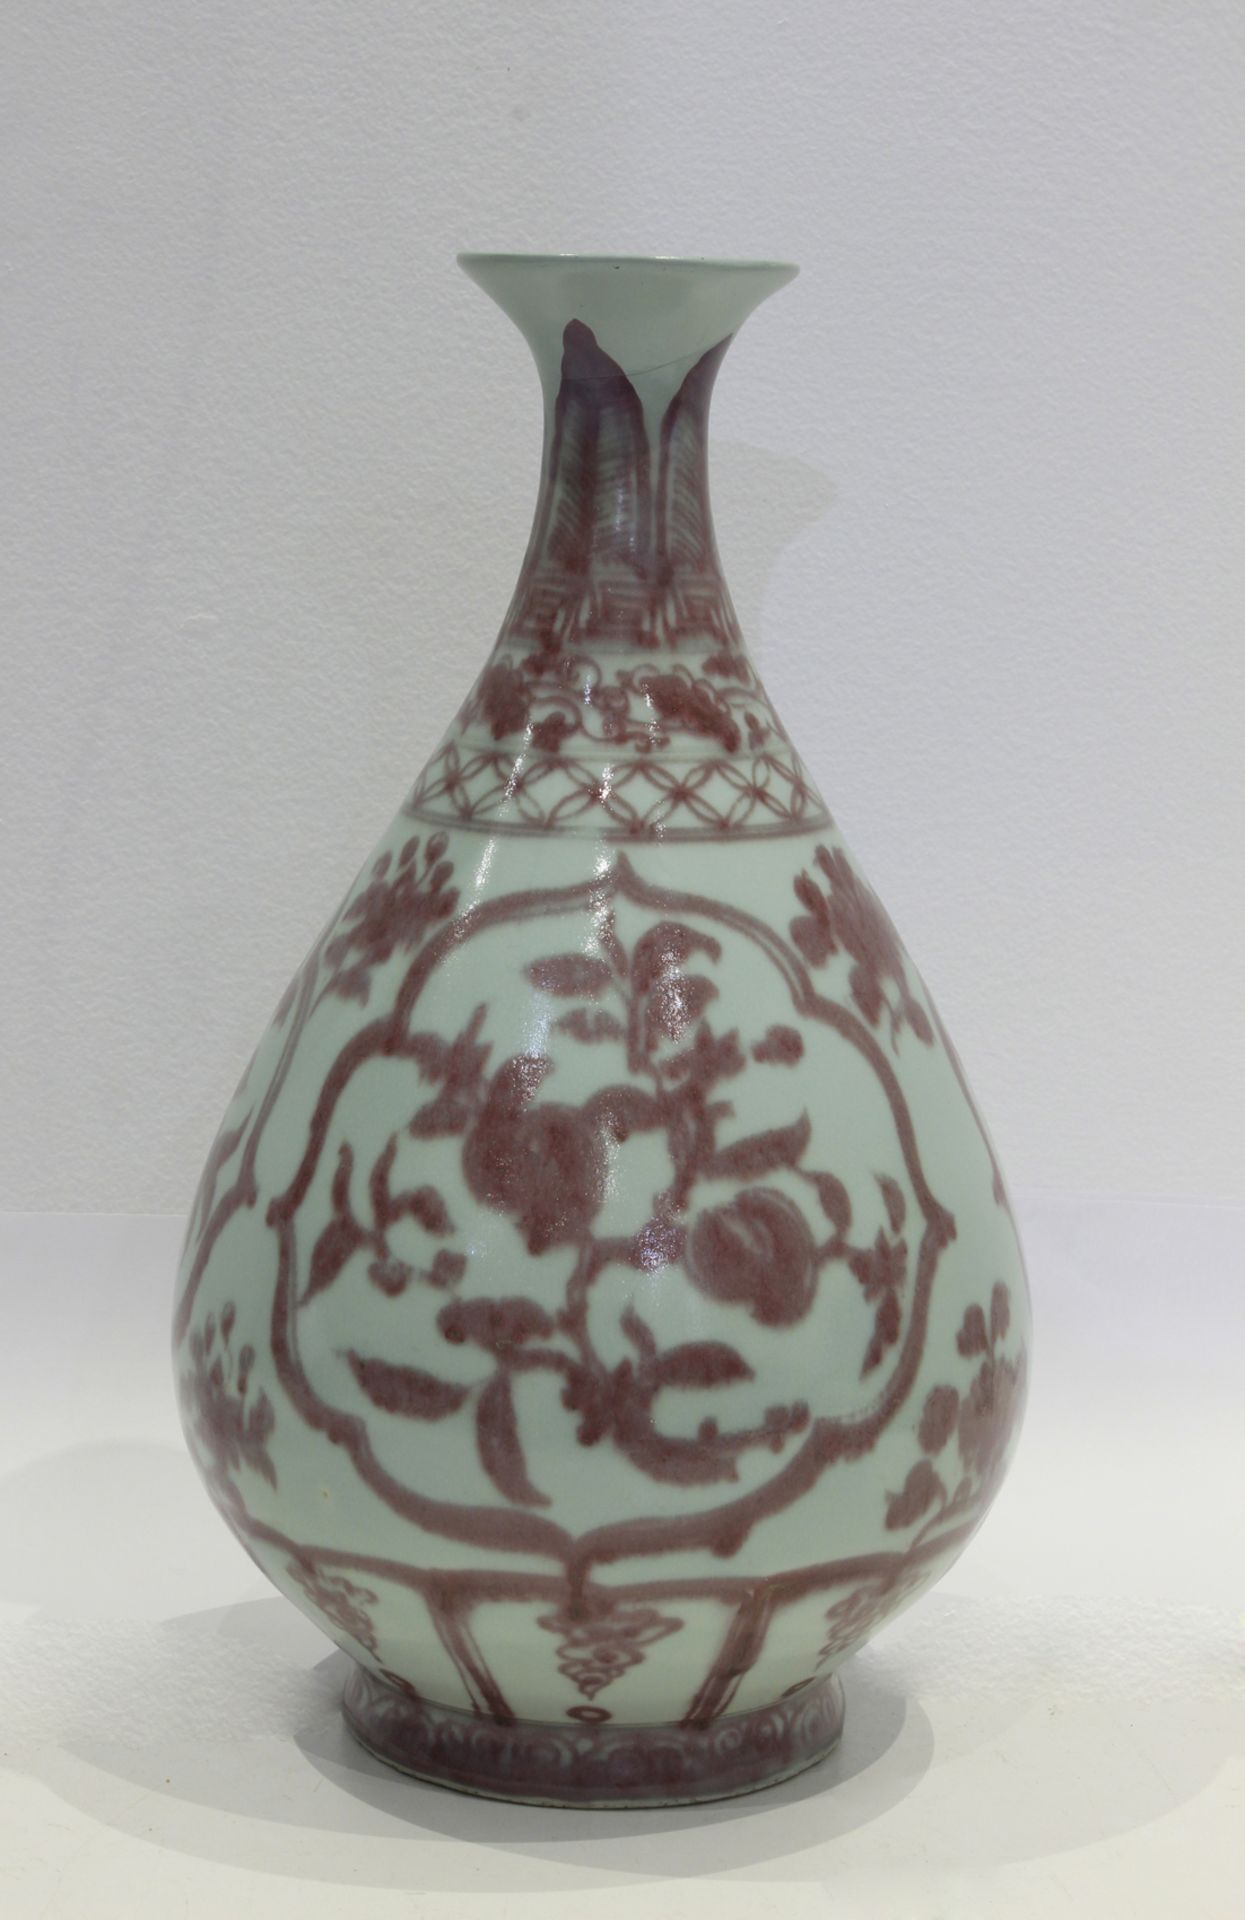 A 20th century Meiping vase in celadon porcelain with rouge de fer decoration - Image 5 of 8